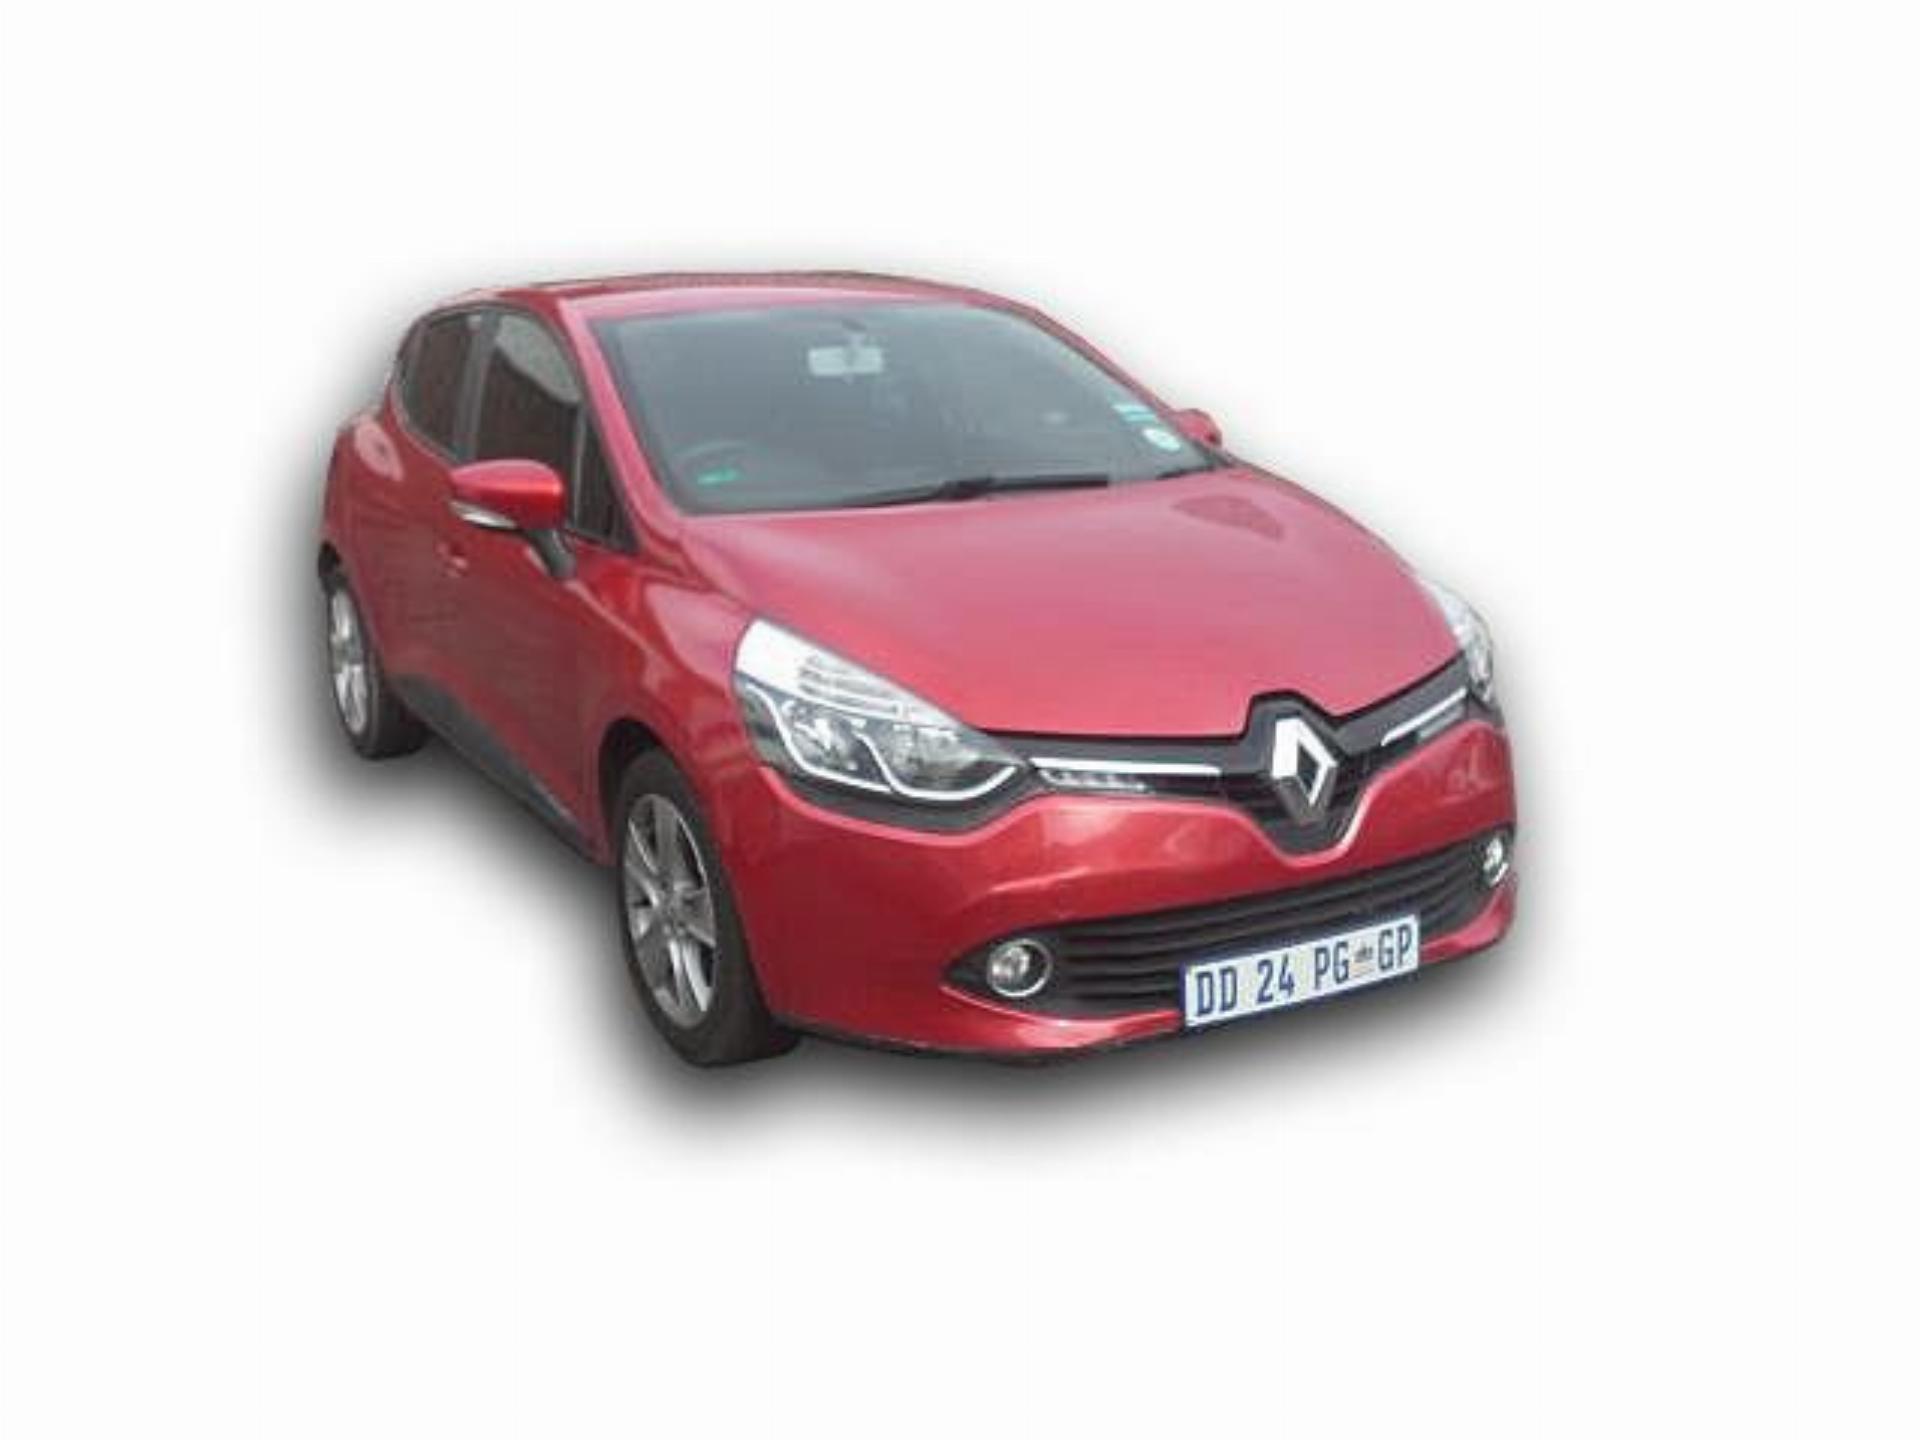 Renault Clio 4, RED, 2014 MODEL,R98000